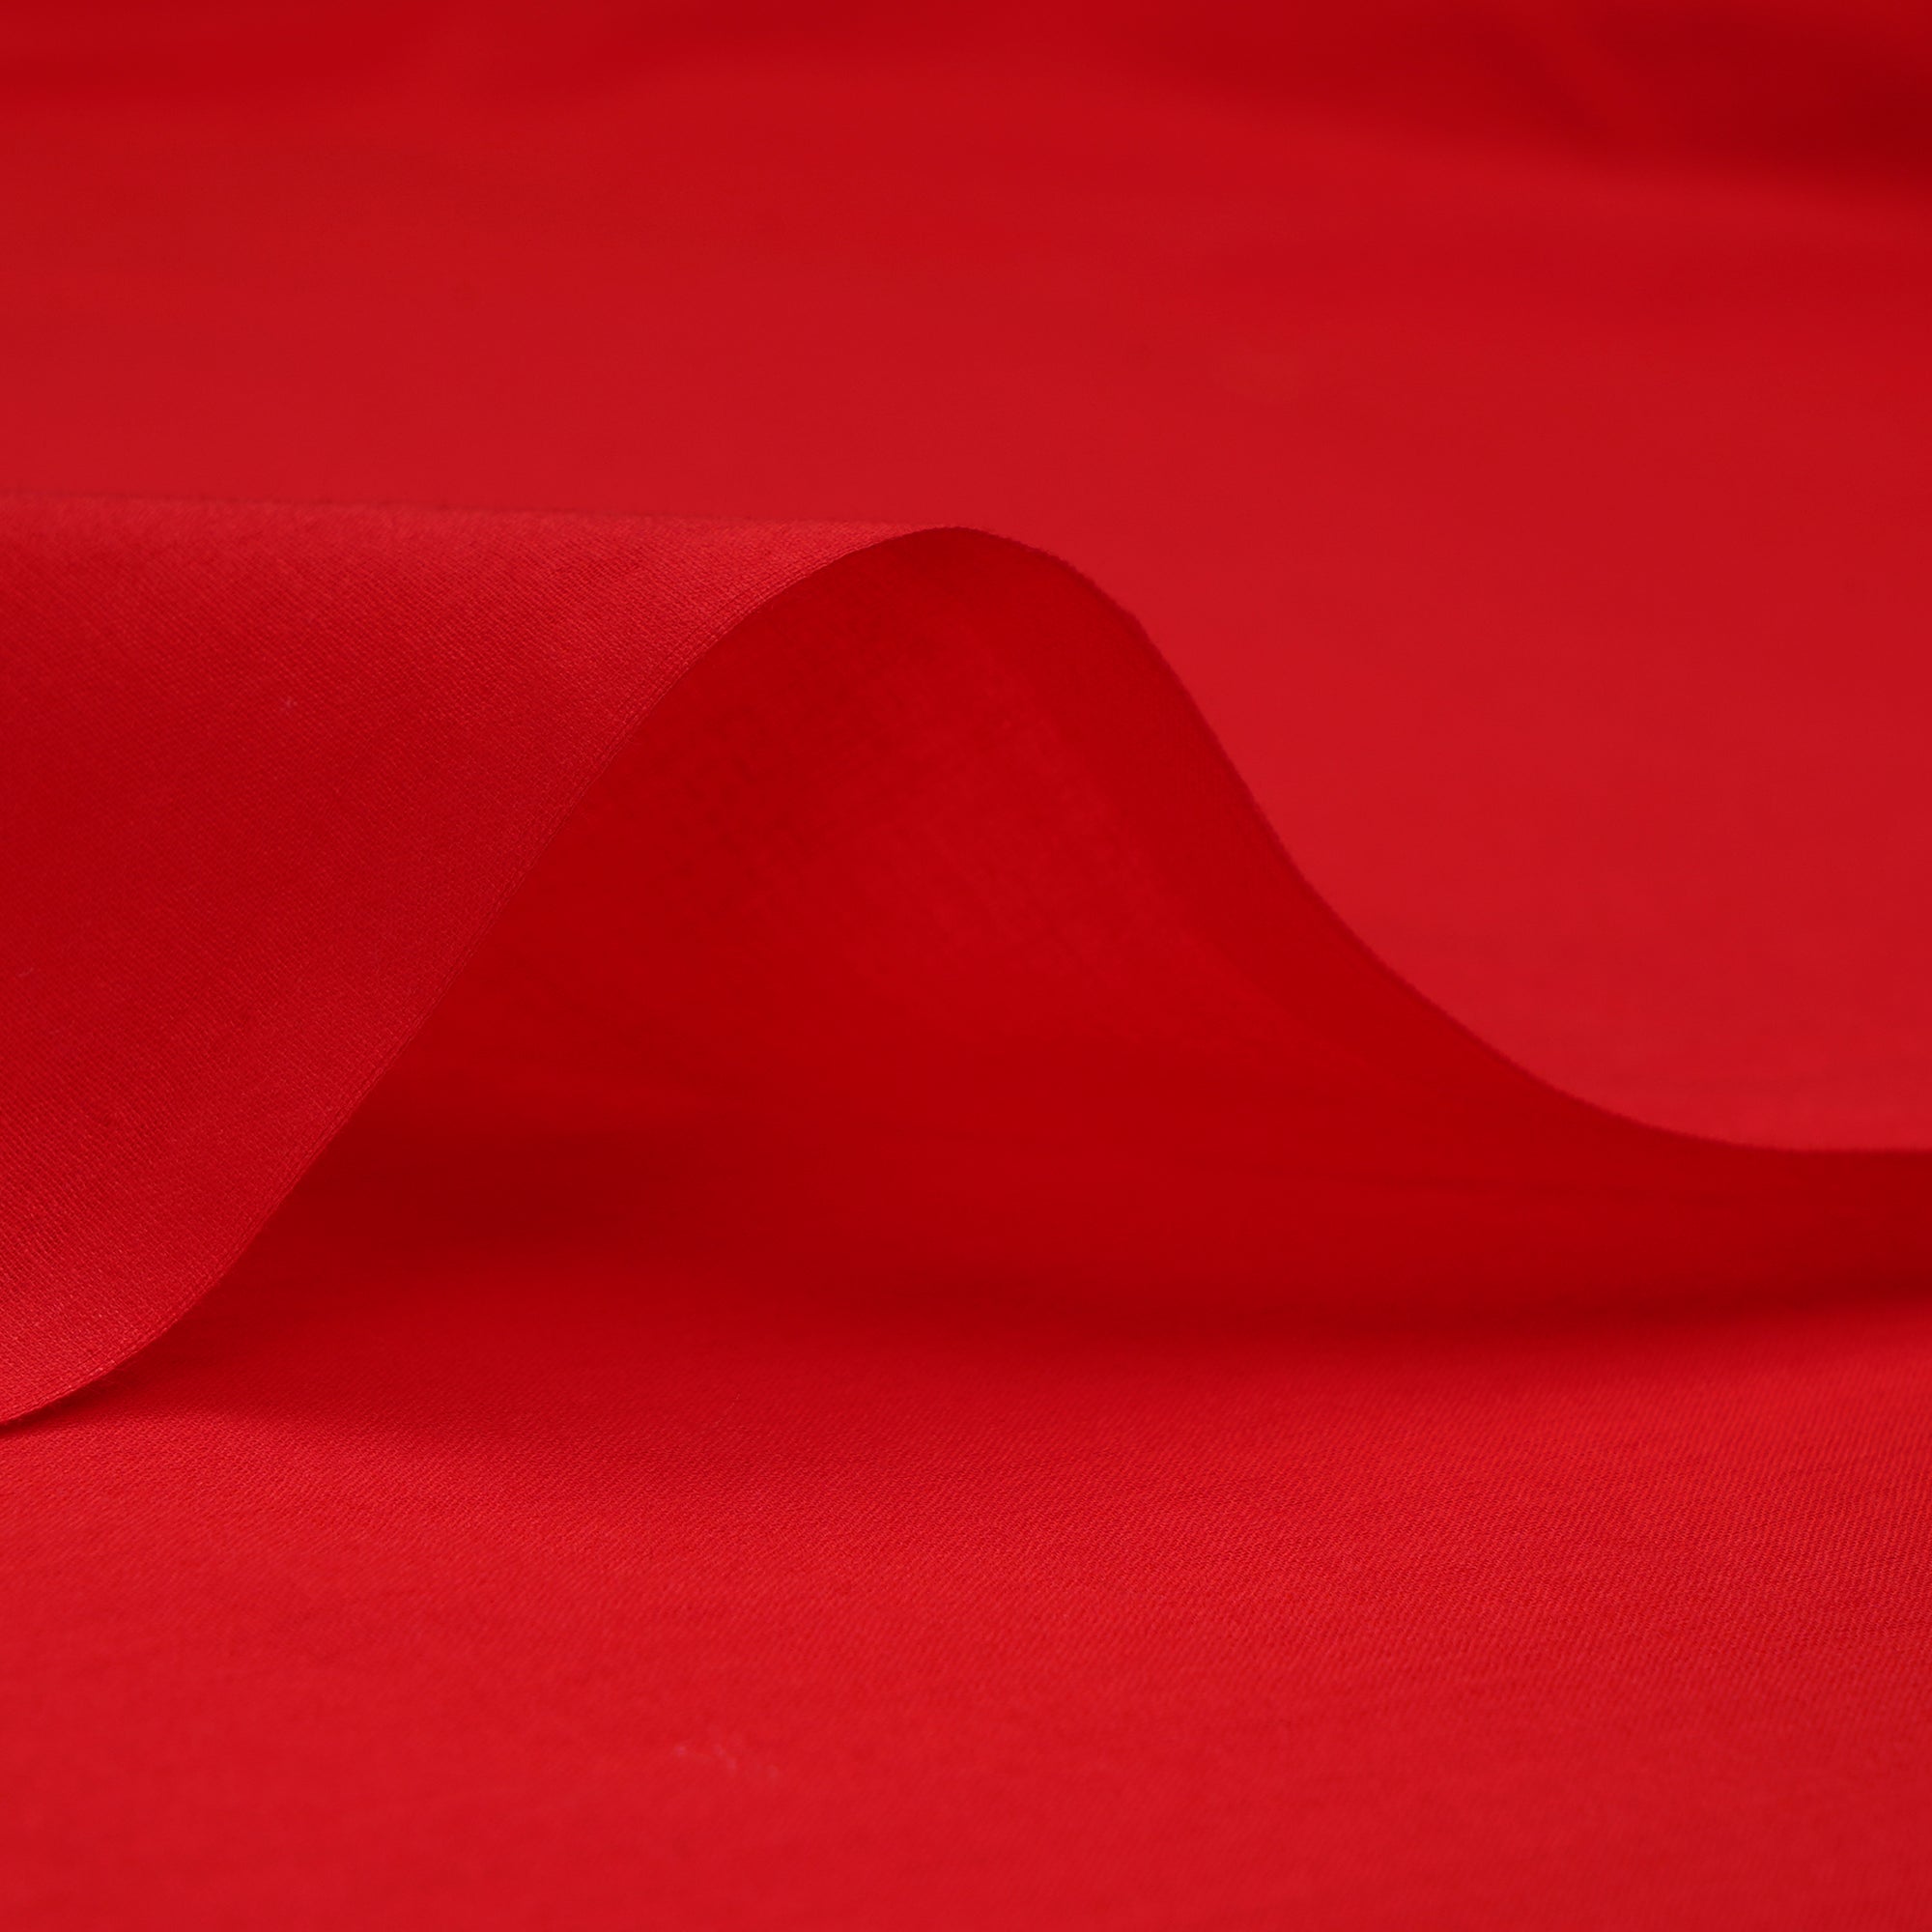 Red Dyed Voile Cotton Fabric